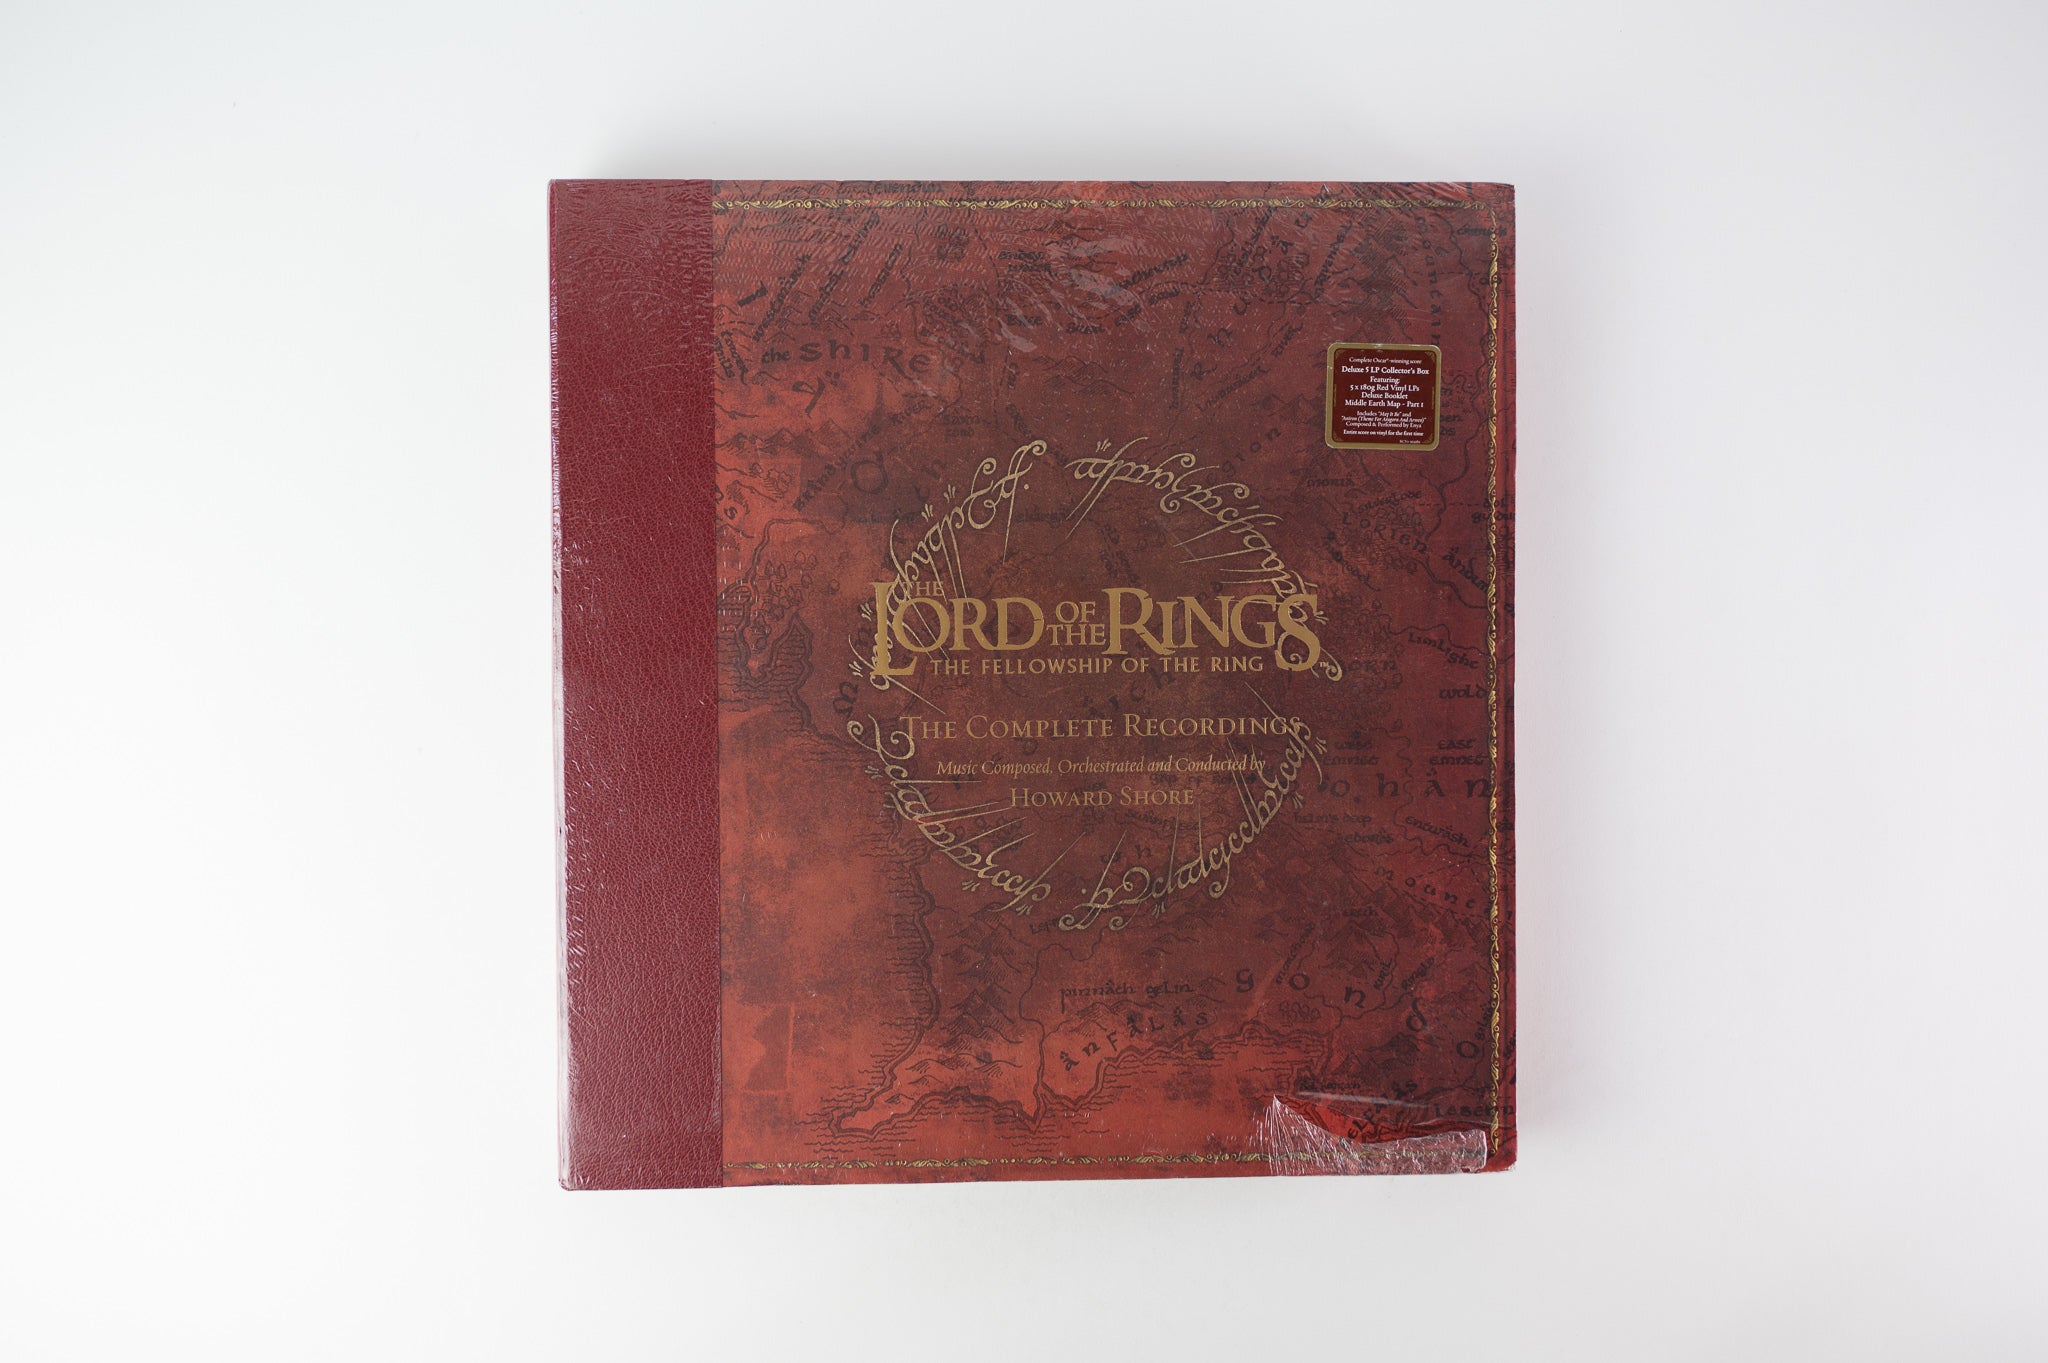 Howard Shore - The Lord Of The Rings: The Fellowship Of The Ring - The Complete Recordings on Reprise Watertower Red Vinyl Sealed